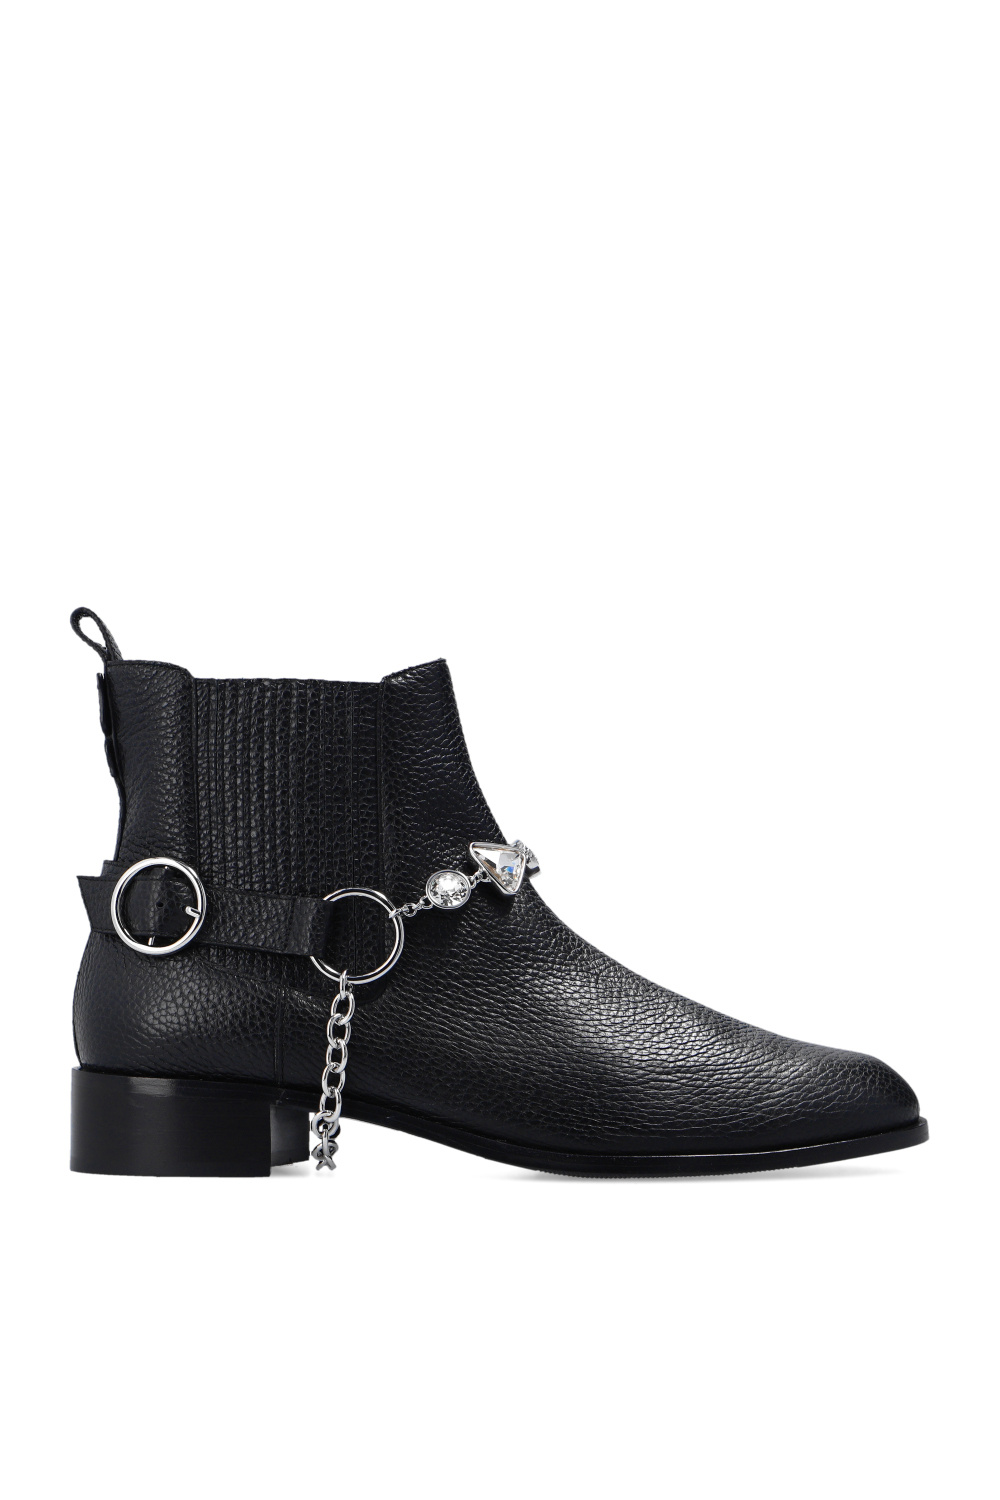 Sophia Webster ‘Bessie’ ankle boots with chain